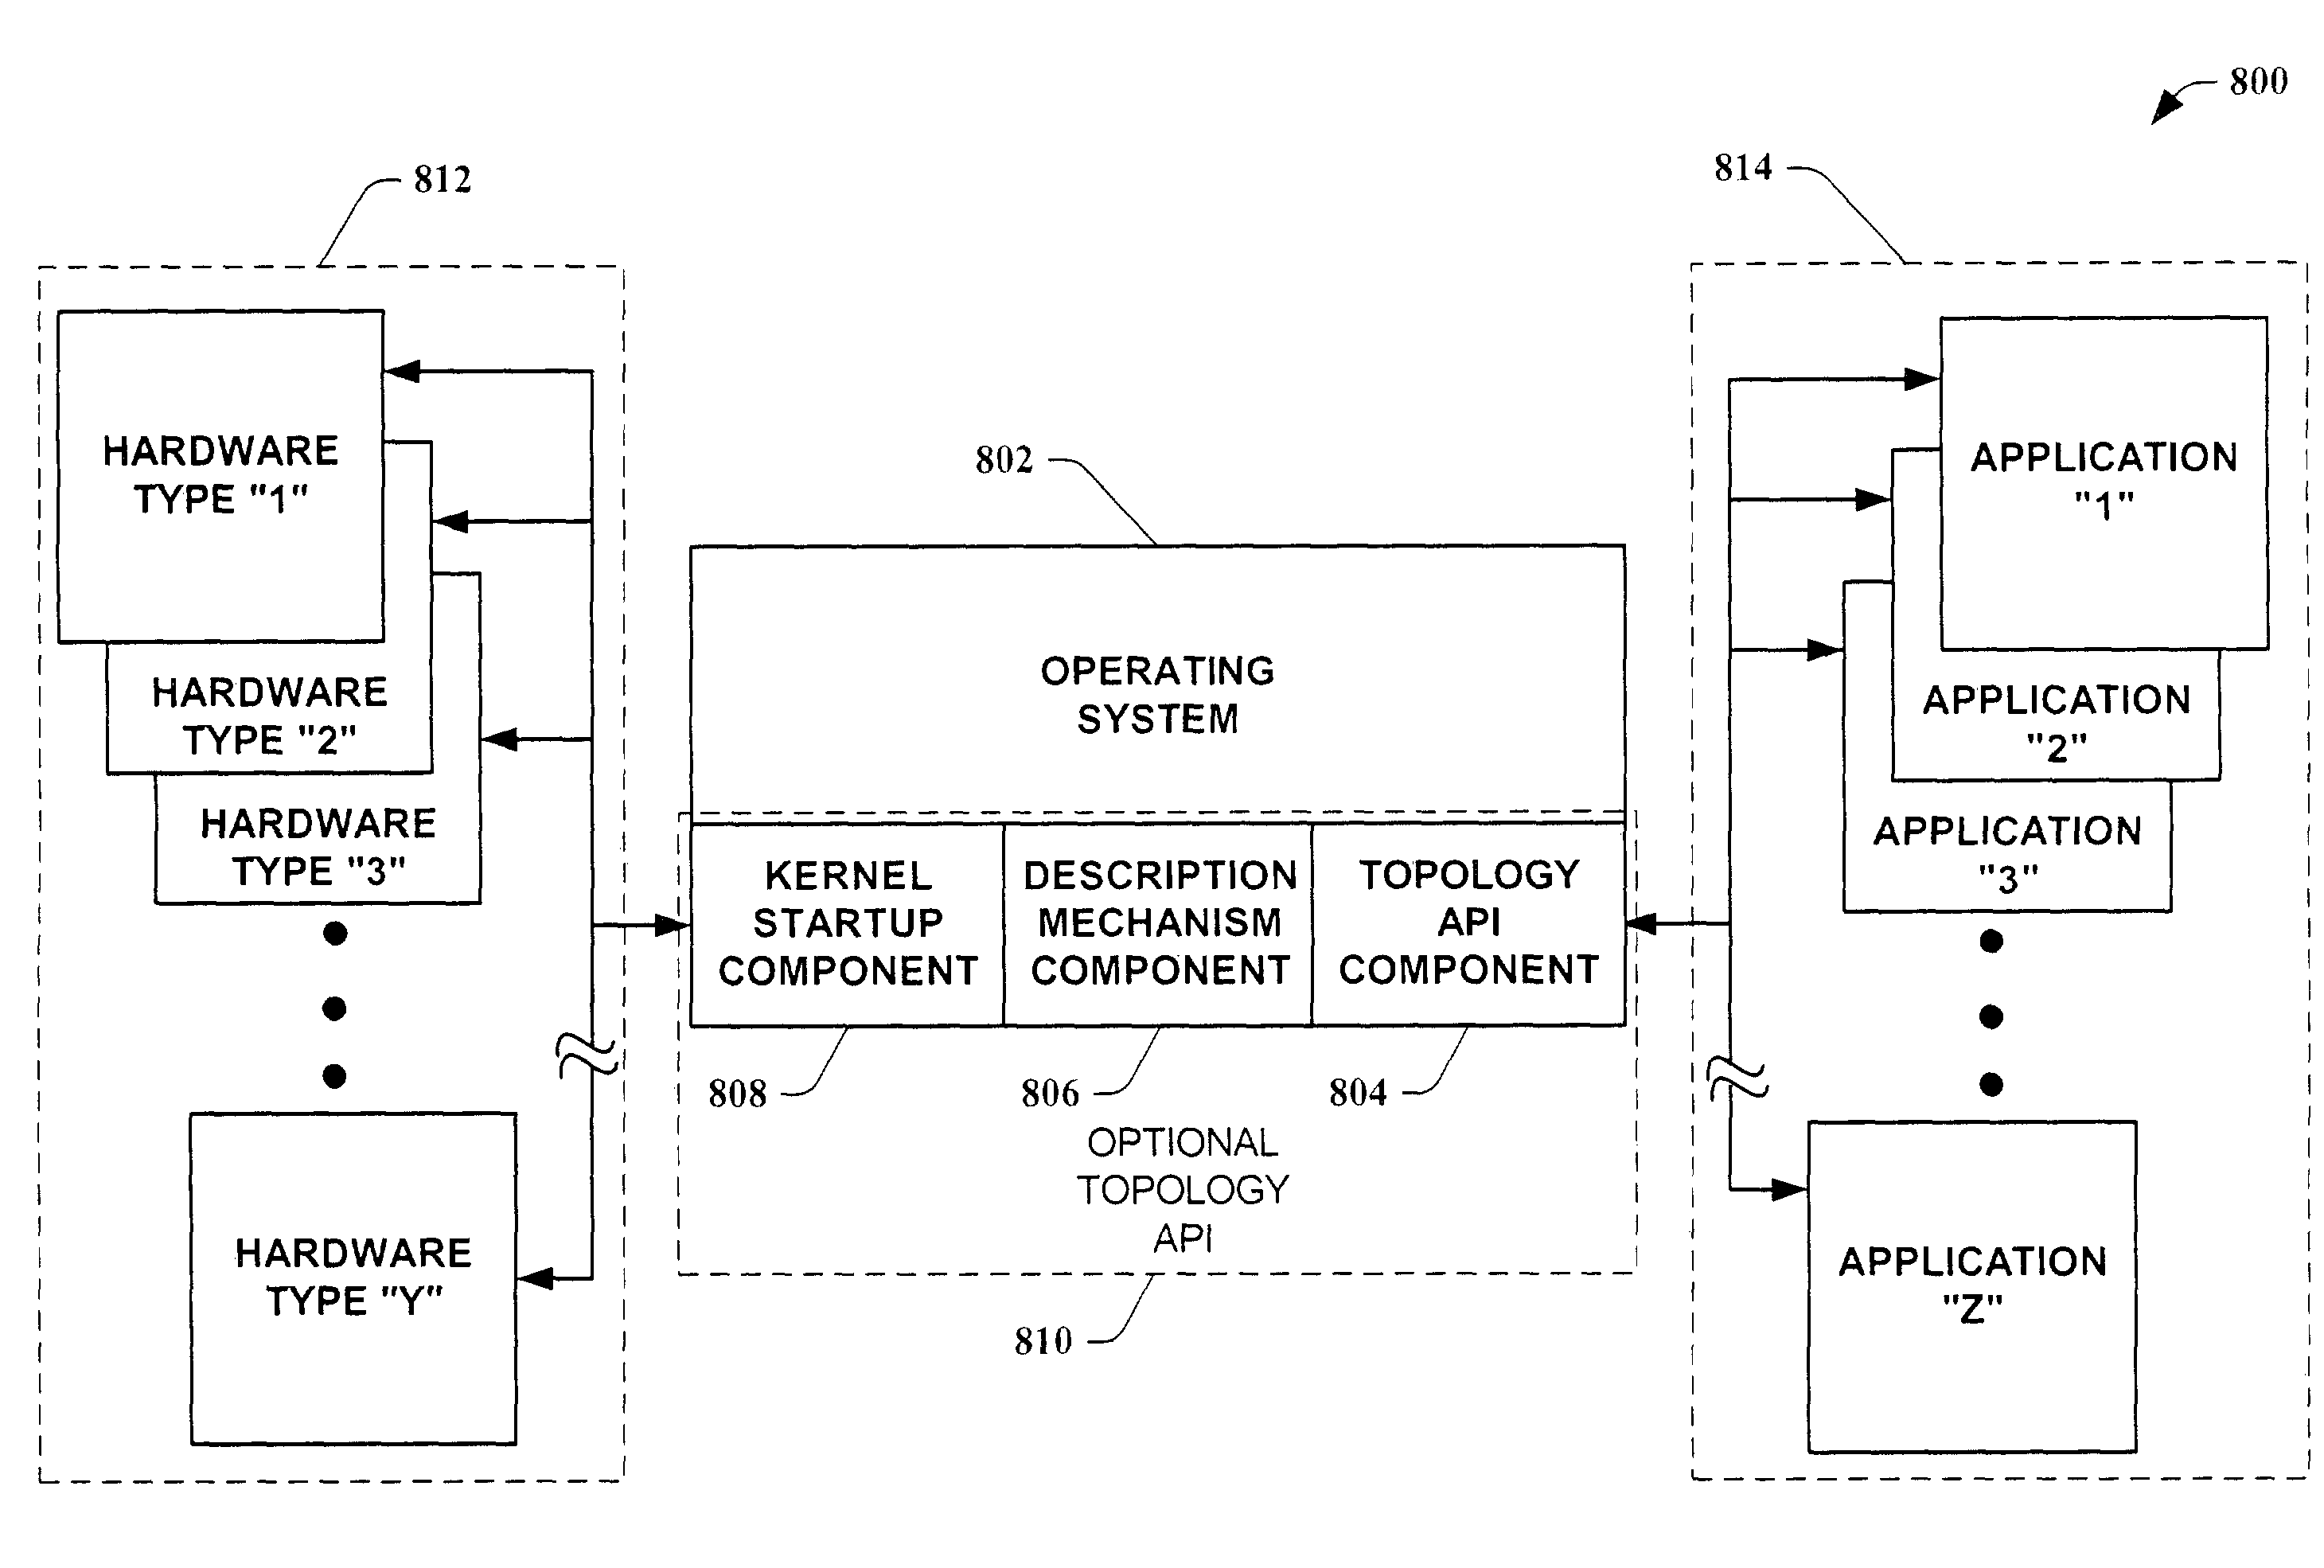 Systems, methods, and apparatus for indicating processor hierarchical topology